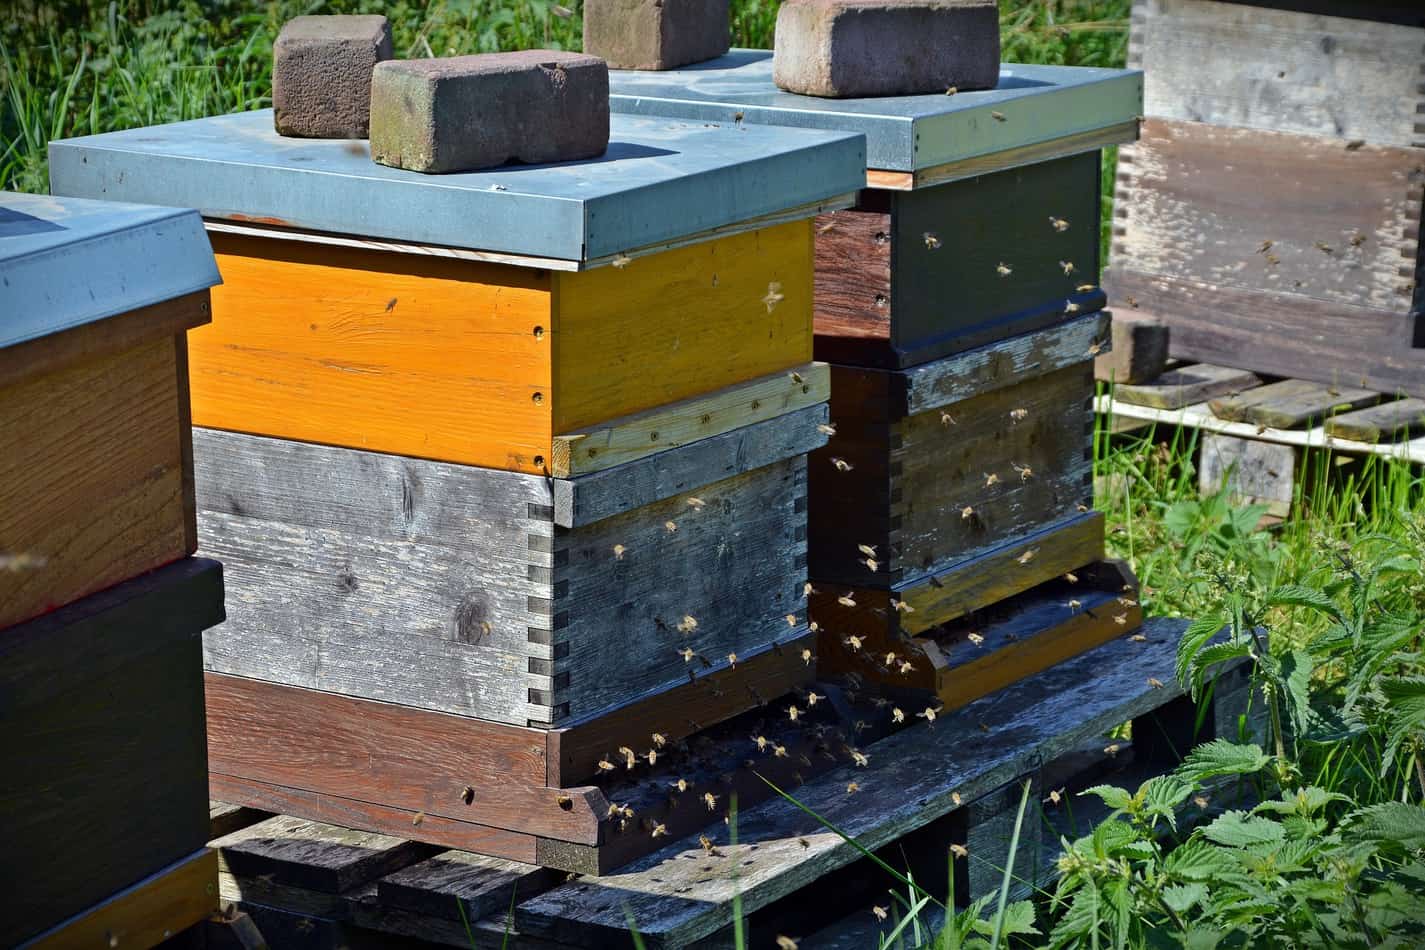 bee hives cost